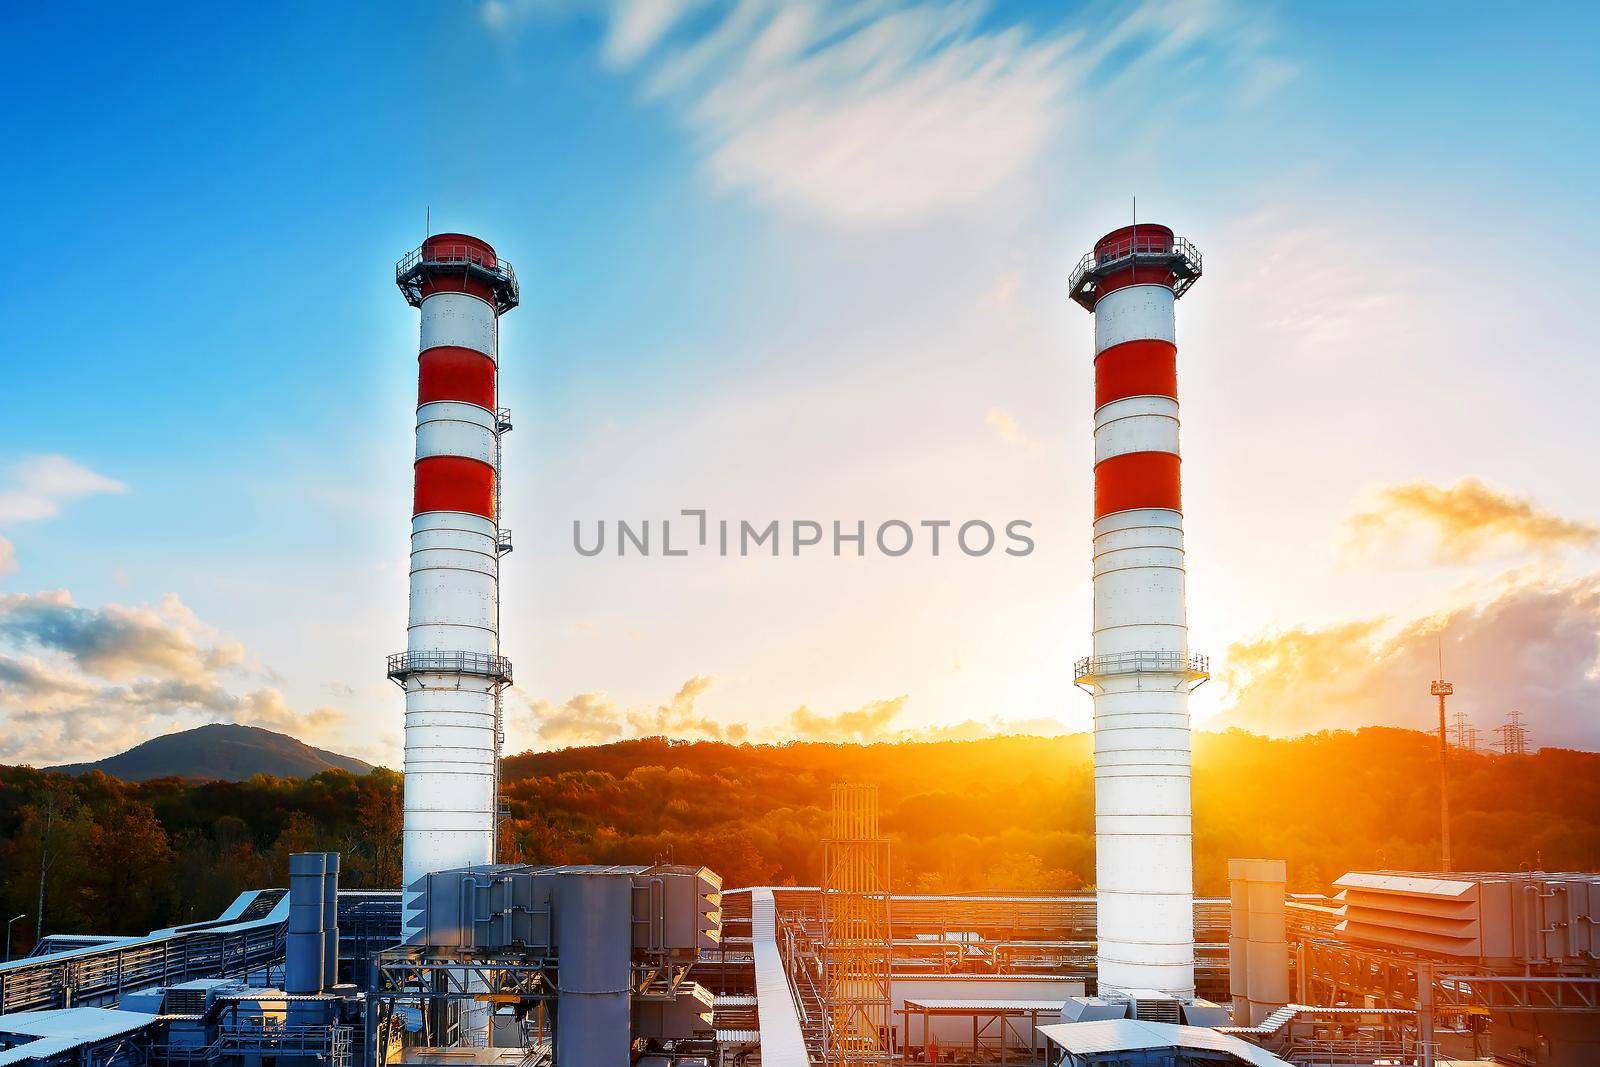 Gas Power Plant with two long pipes of white color with red poloskai on the background of mountains and sunrise in a picturesque environmentally clean place. Power plant area, light industry at sunset. Ecology and low emissions. Clean energy